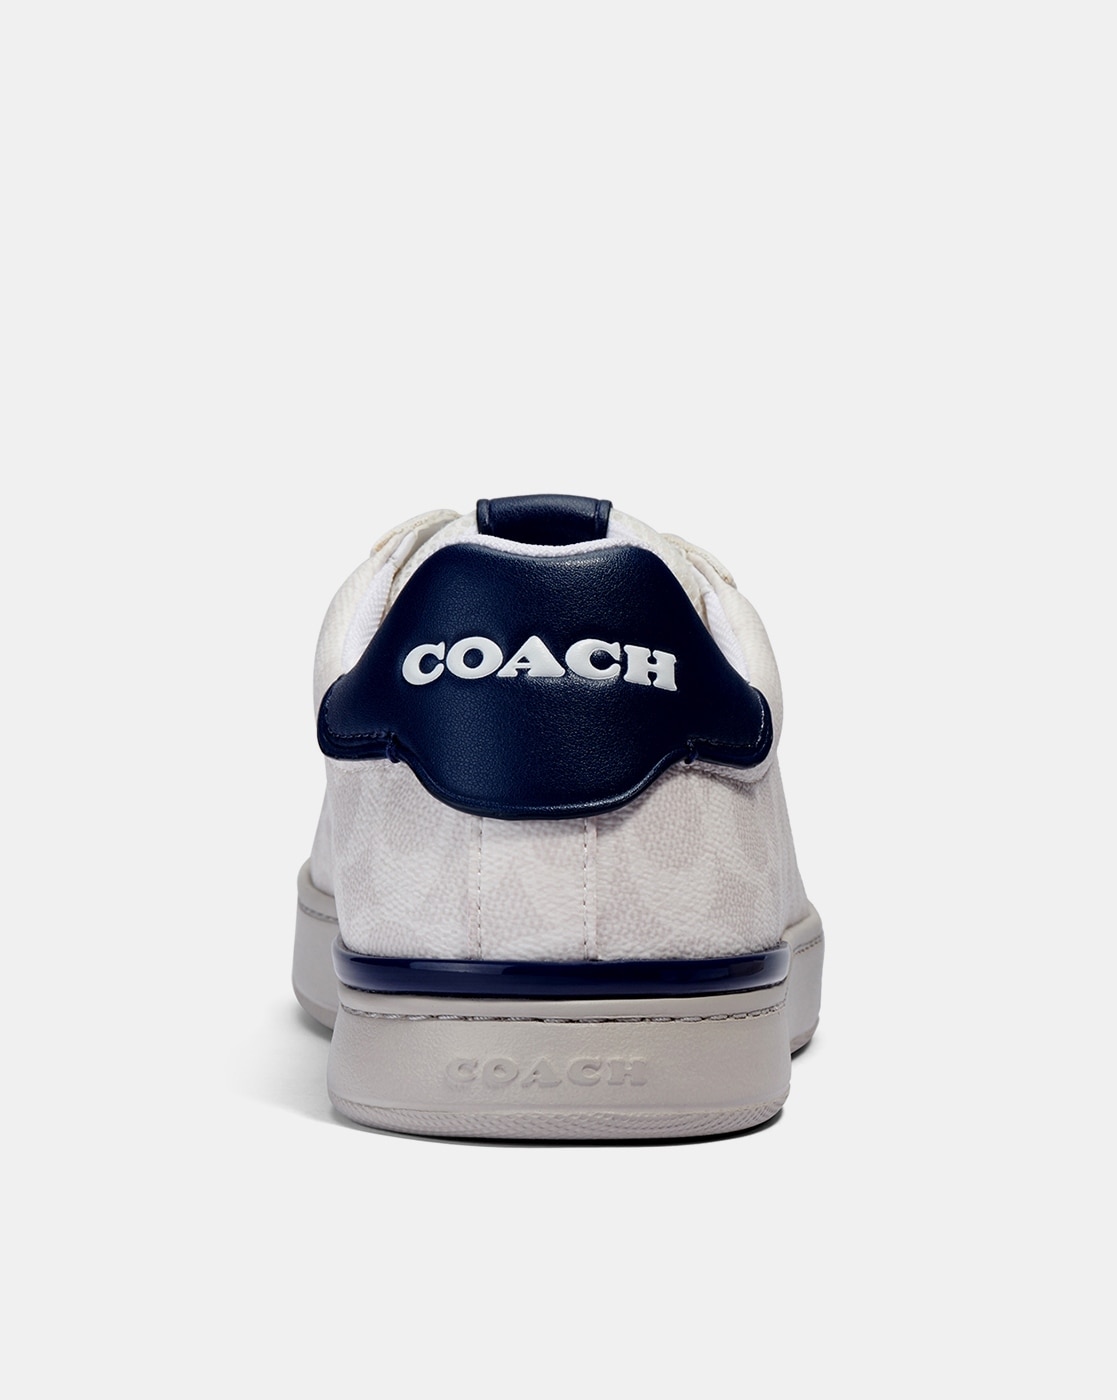 White Distressed Sneakers by Coach 1941 on Sale